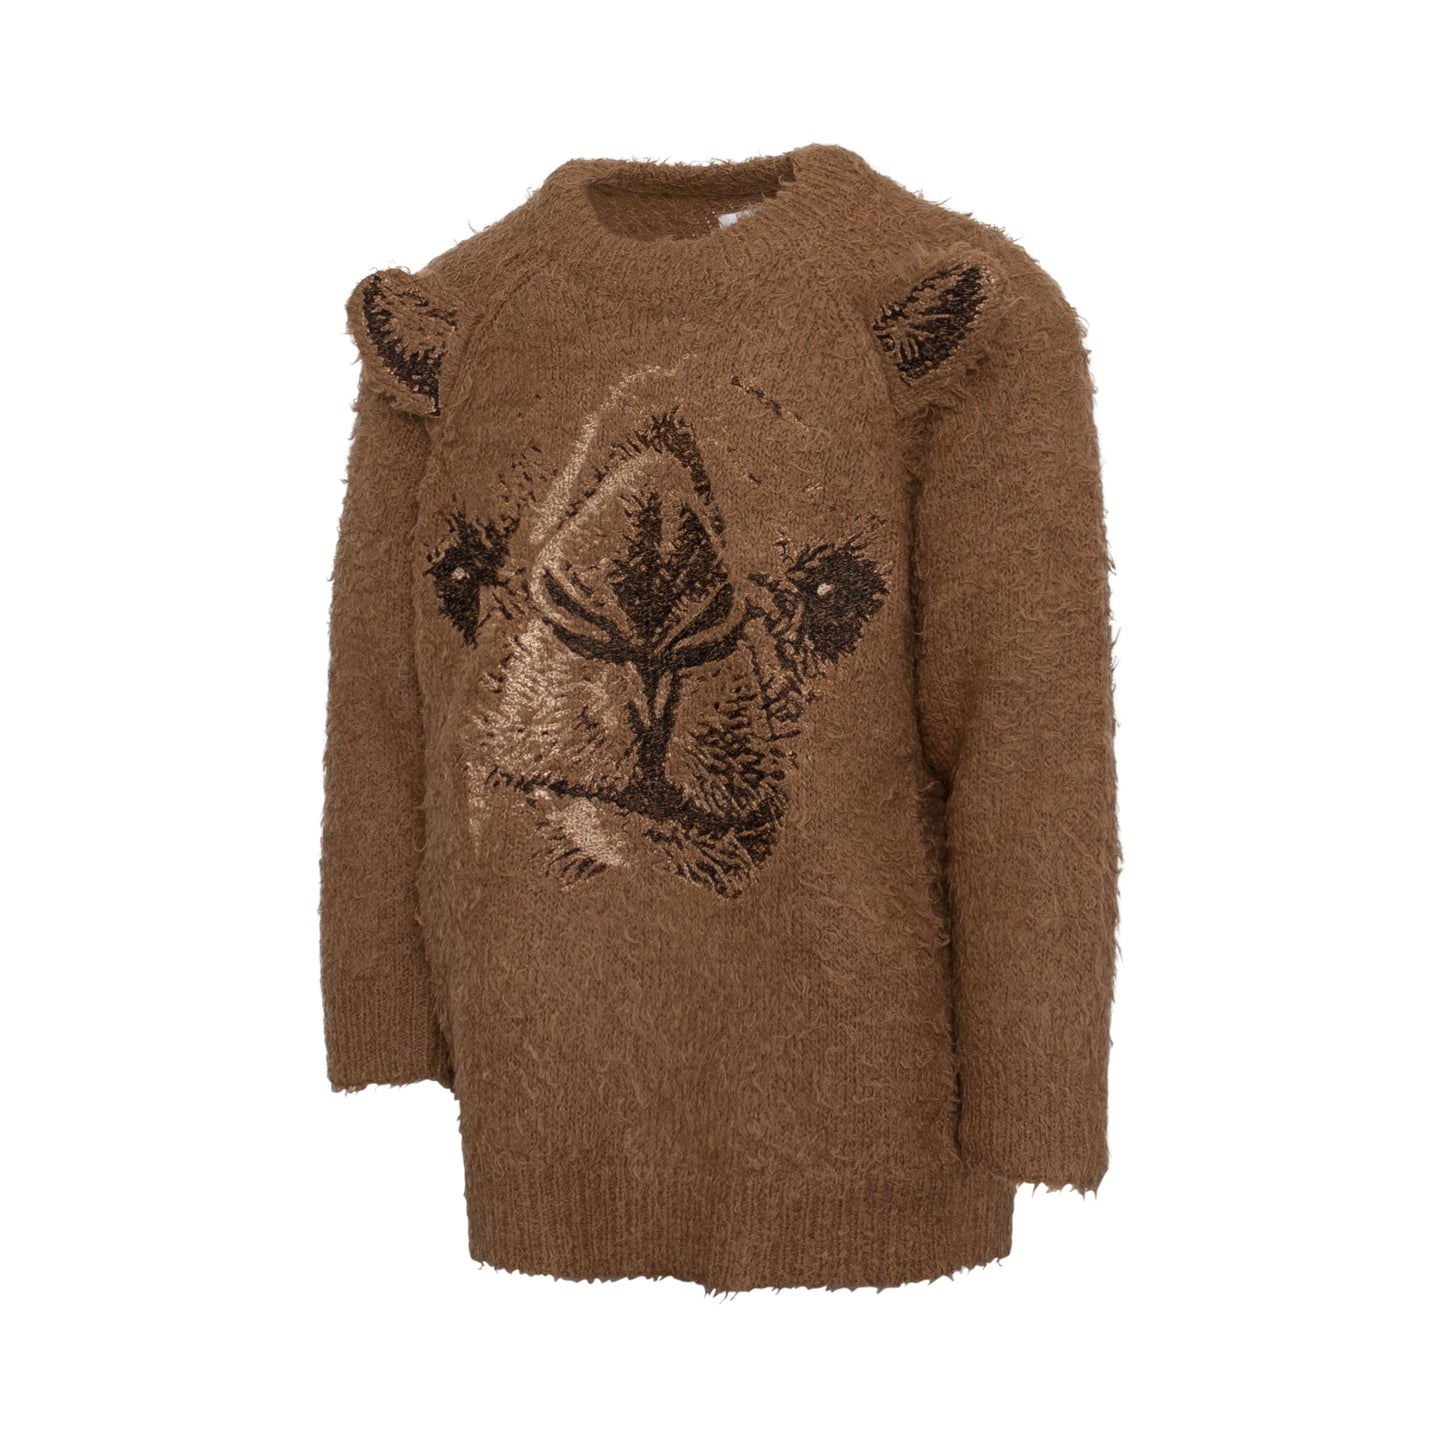 Camel Embroidery Knit Sweater in Camel